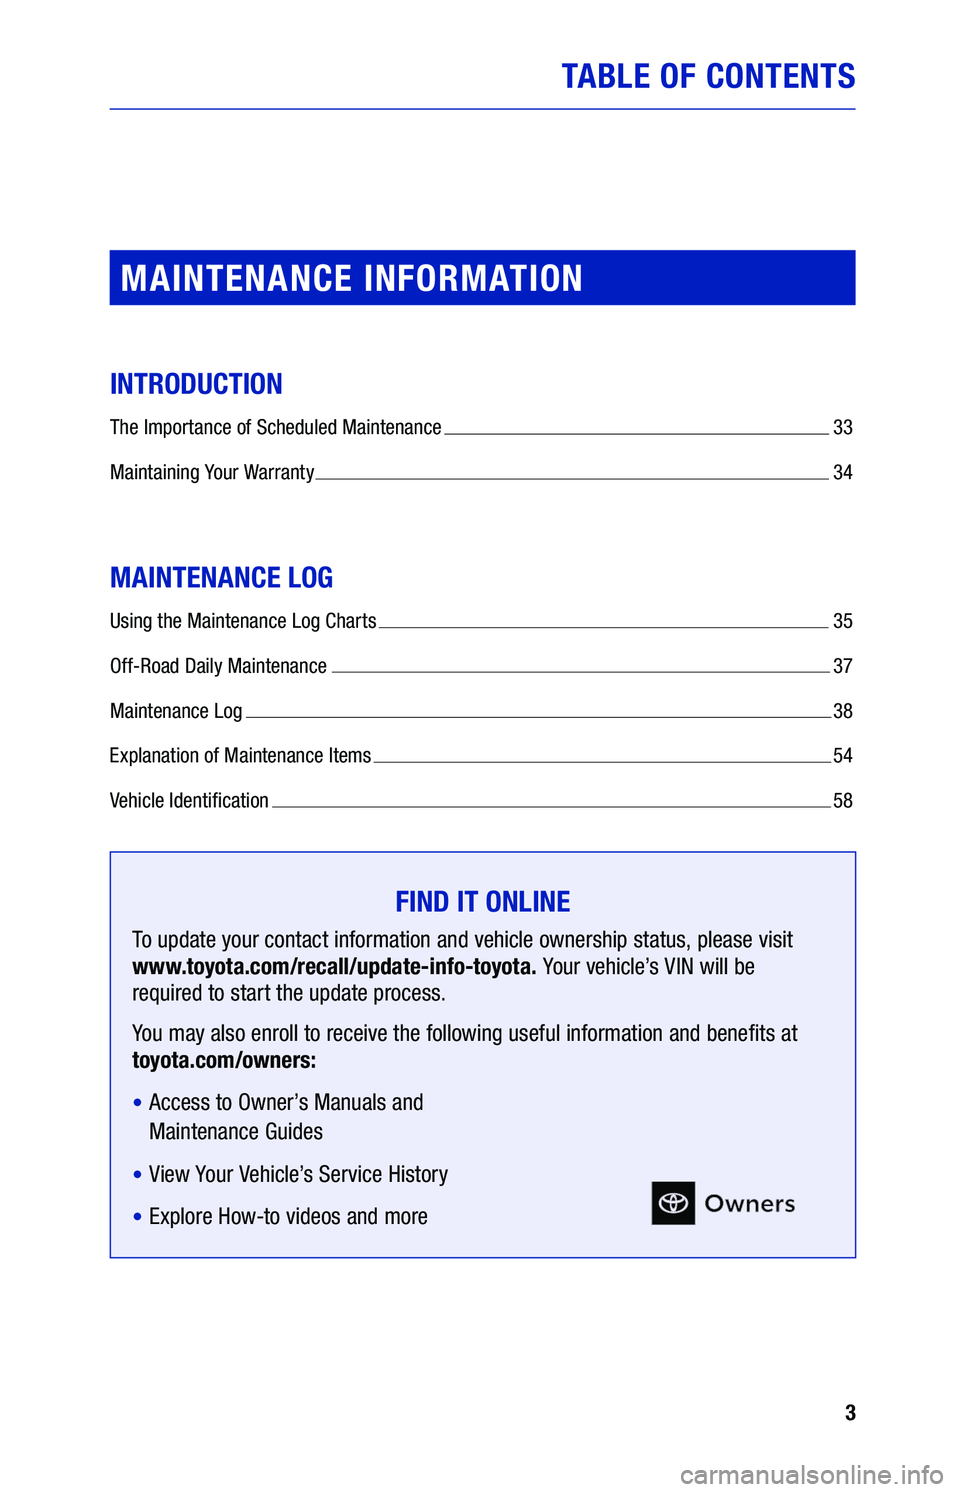 TOYOTA TUNDRA 2021  Warranties & Maintenance Guides (in English) 3
TA BL E OF CONTENTS
MAINTENANCE  INFORMATION
INTRODUCTION
The Importance  of Scheduled  Maintenance   33
Maintaining Your  Warranty 
 34
MAINTENANCE  LOG
Using the Maintenance  Log Charts   35
Off-R